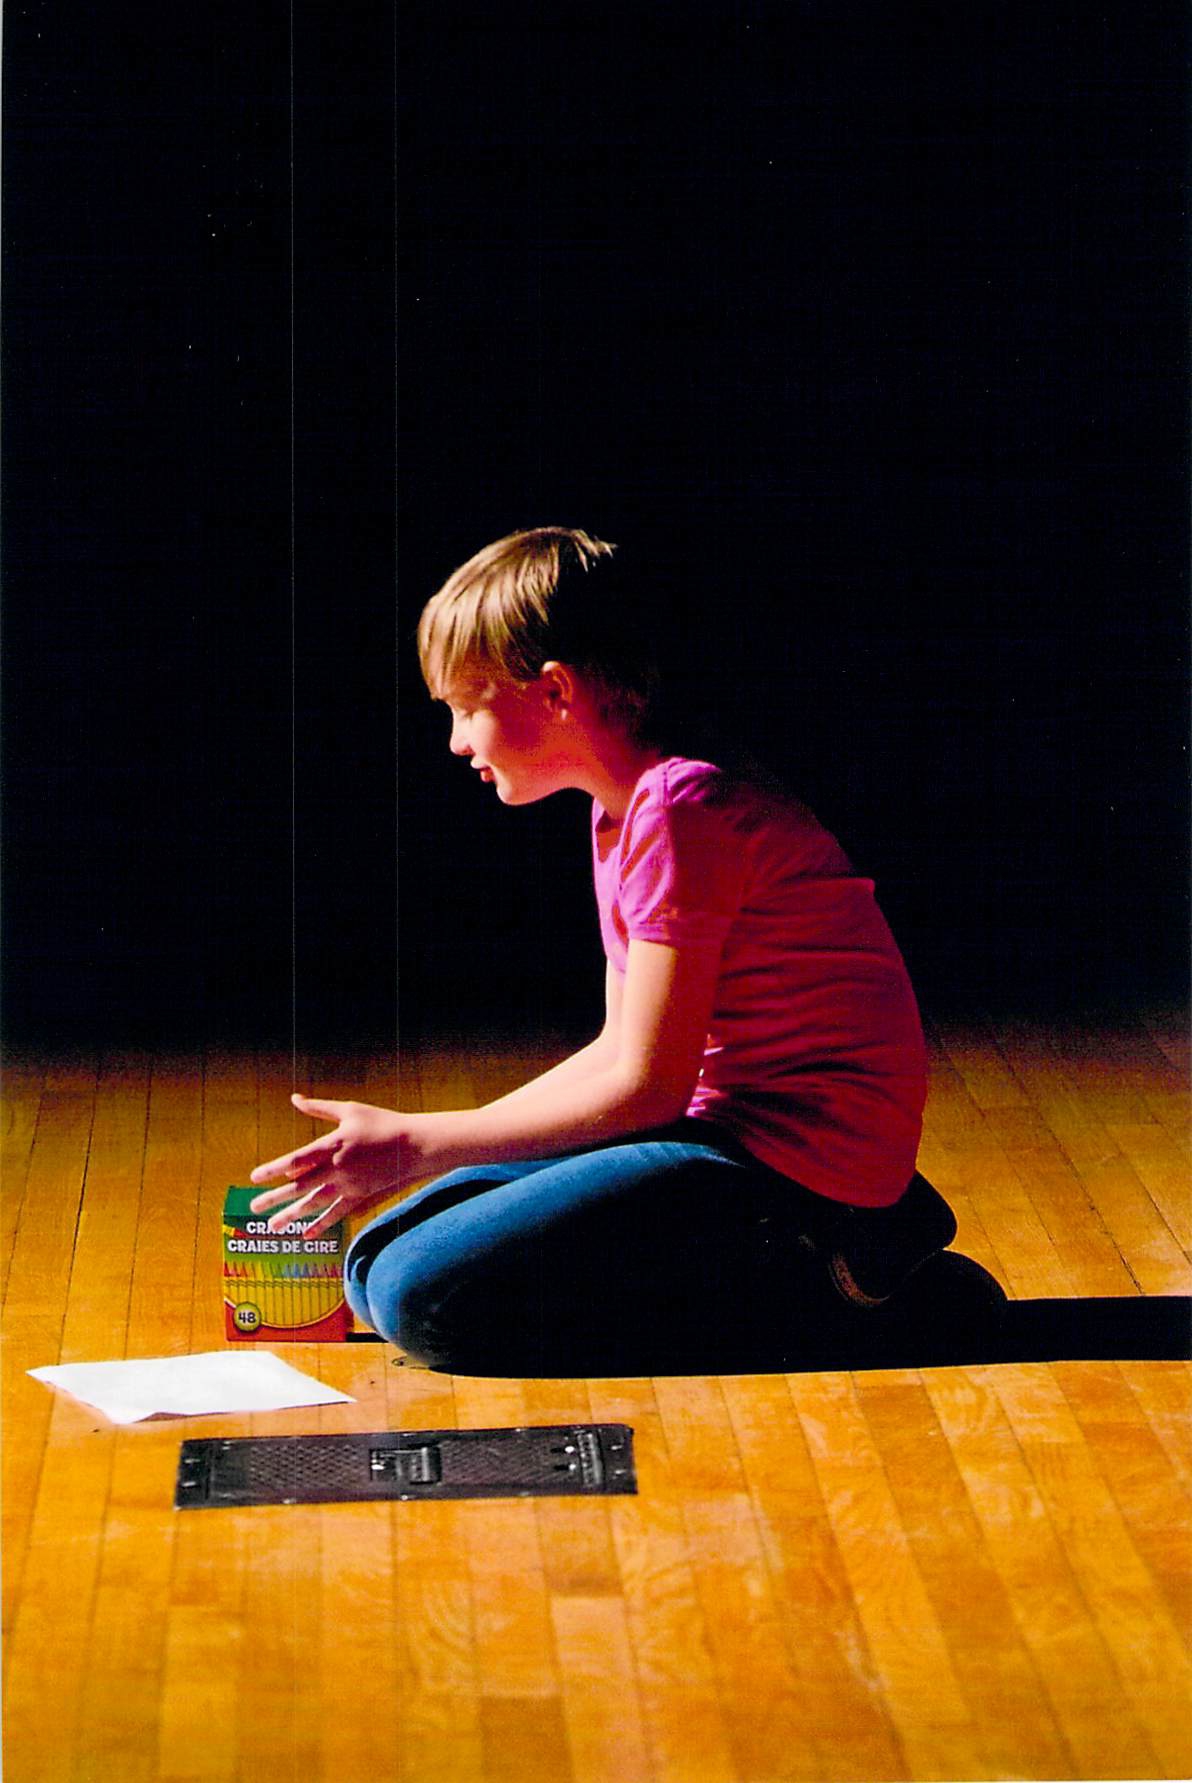 Child Coloring on Stage